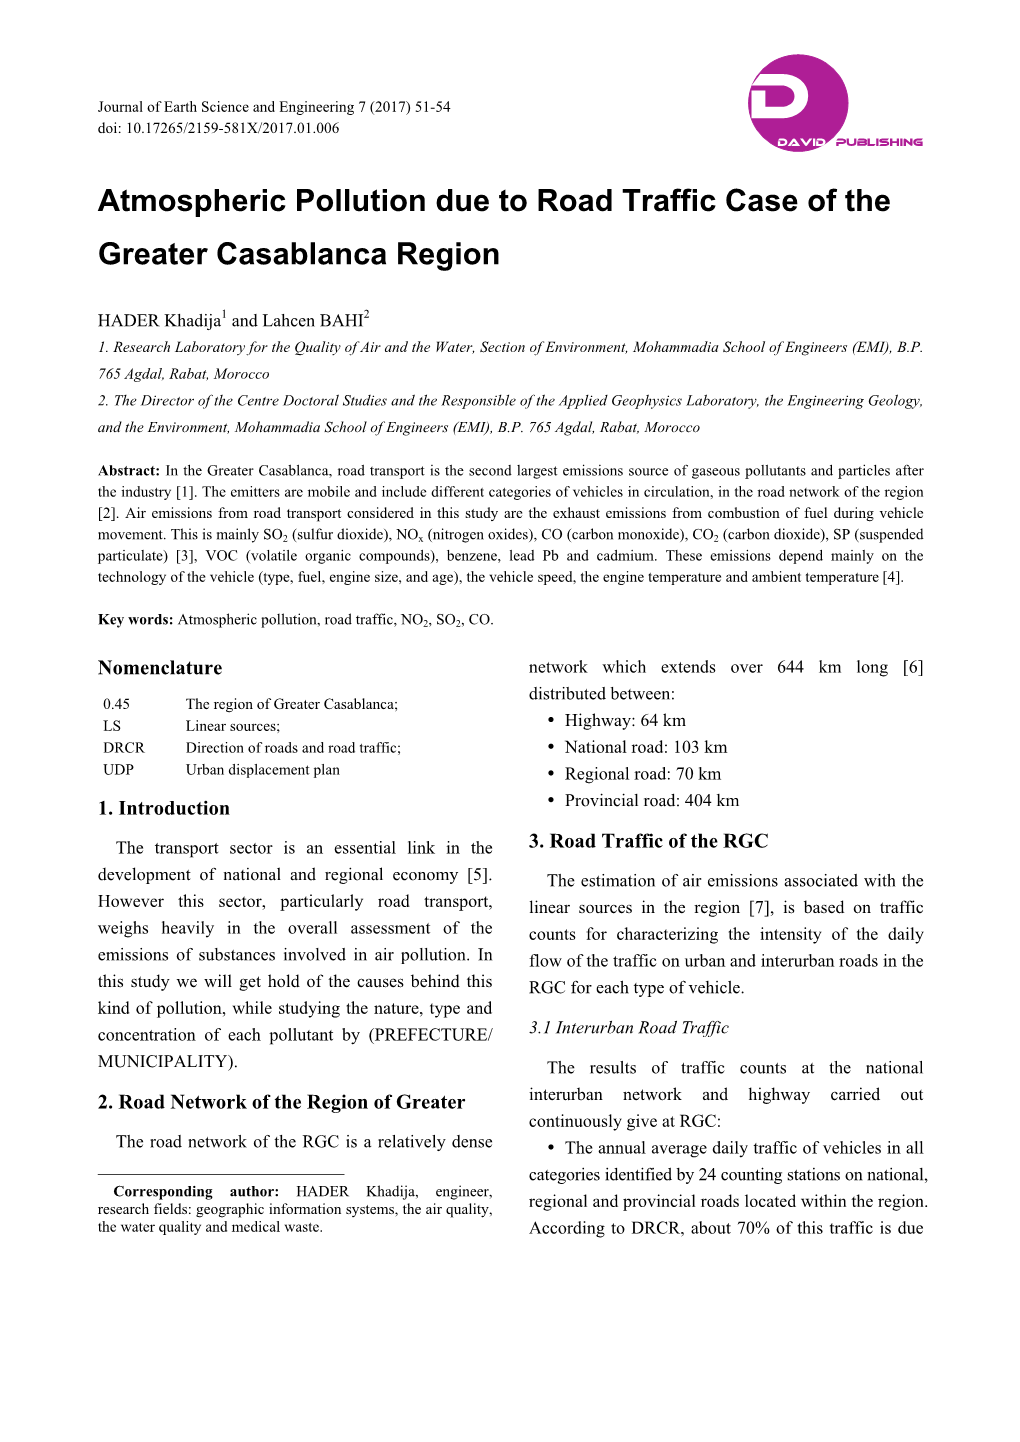 Atmospheric Pollution Due to Road Traffic Case of the Greater Casablanca Region